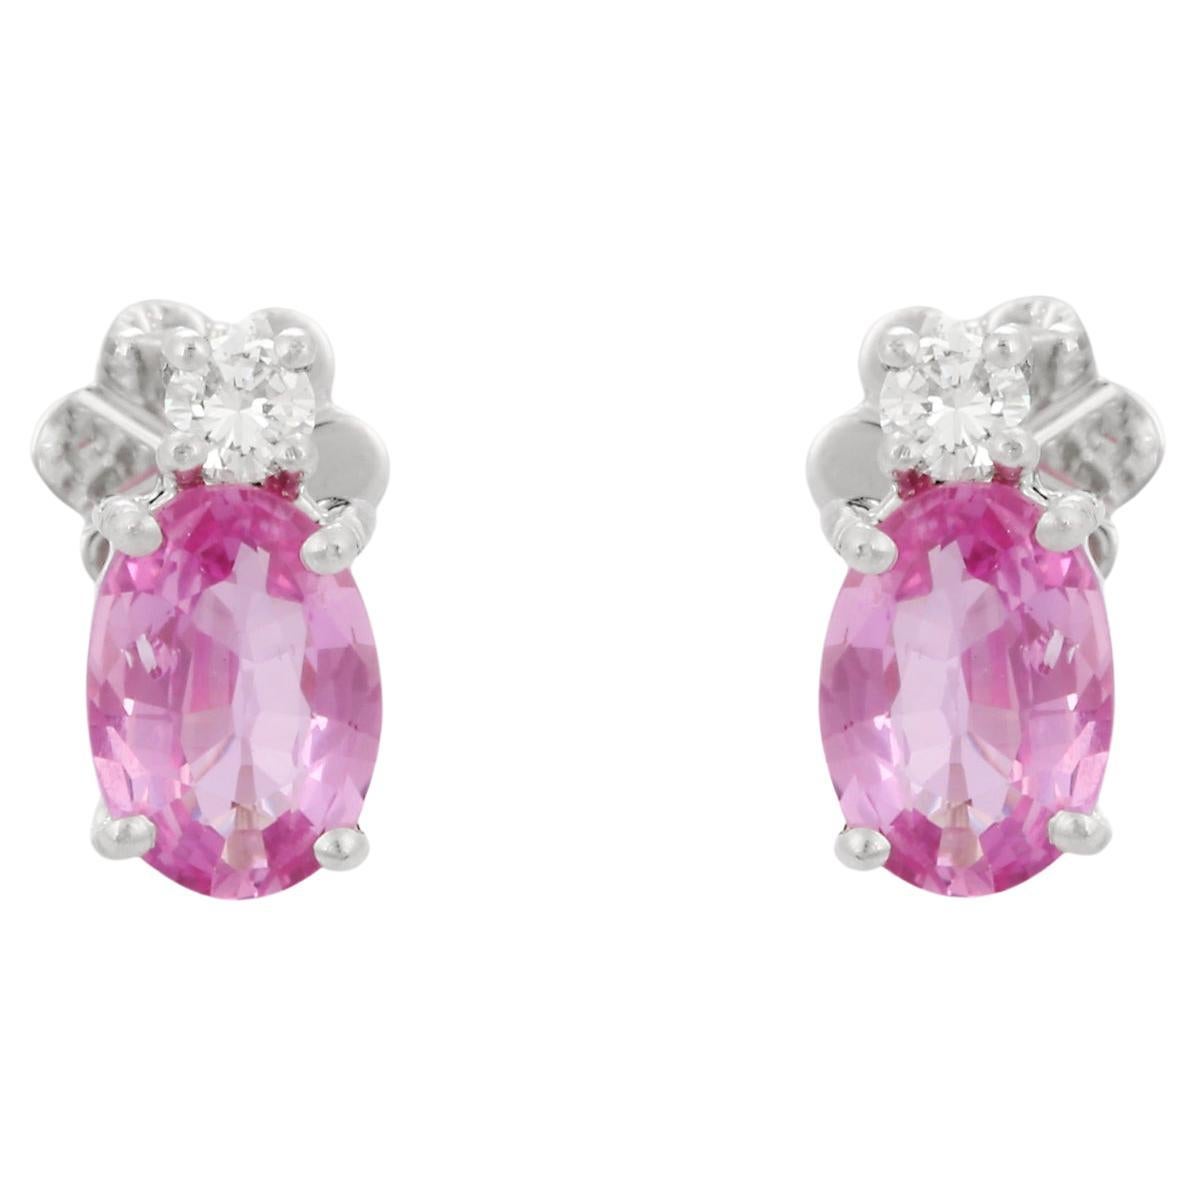 1.48 Carat Prong Set Pink Sapphire Diamond Stud Earrings in 18K Solid White Gold